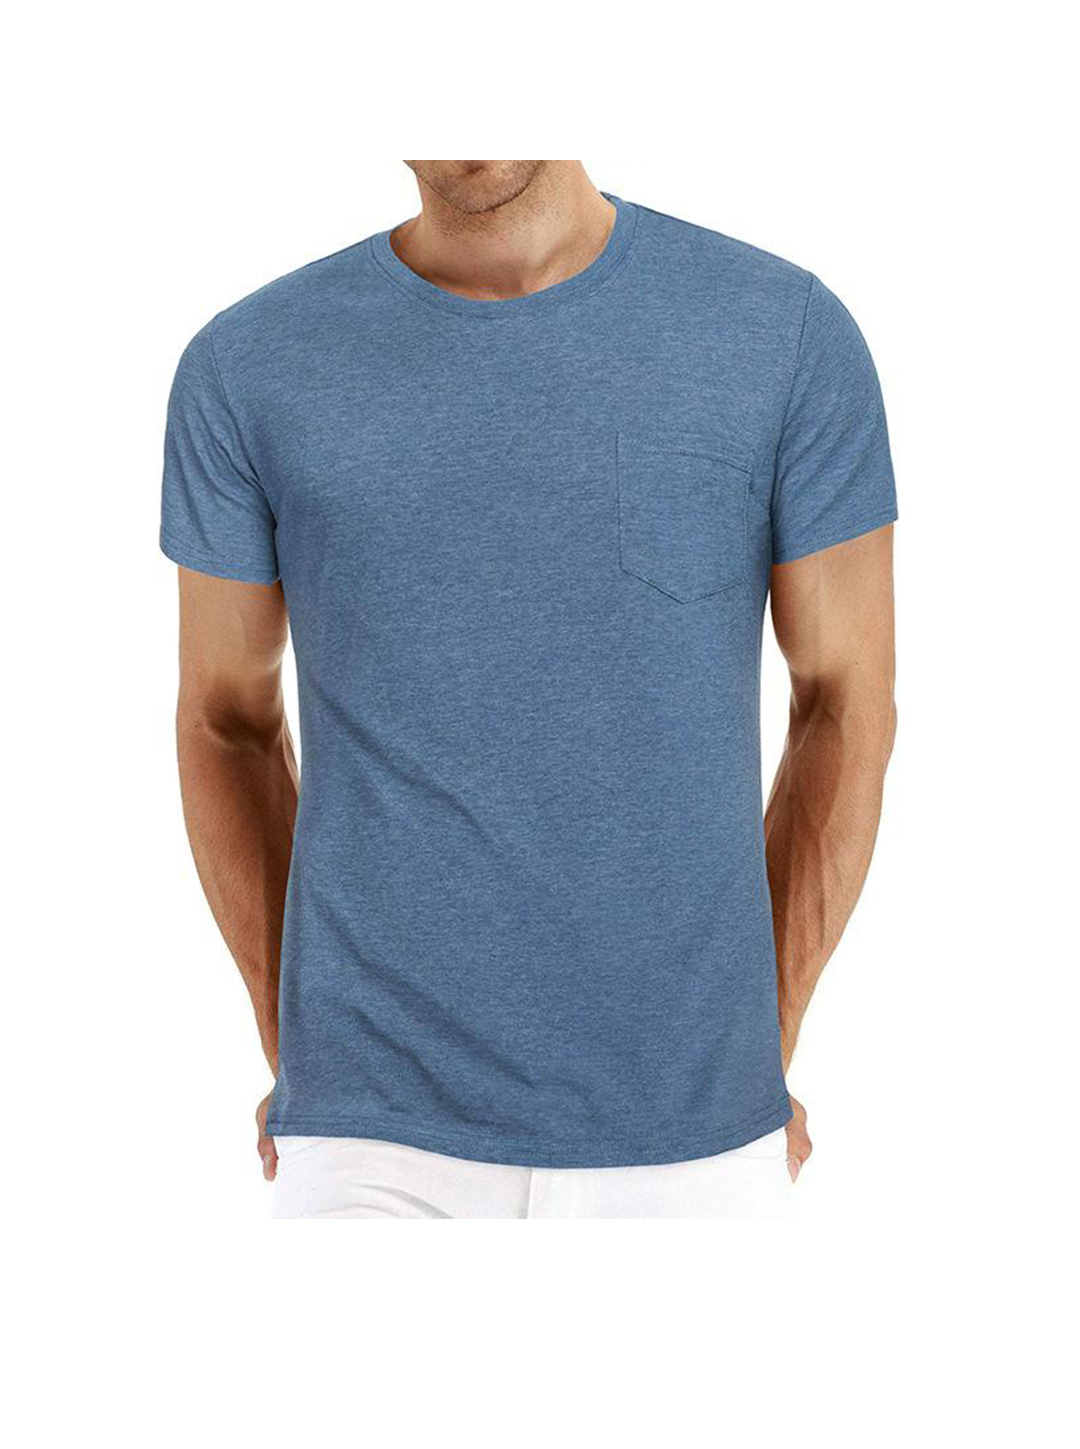 Men's Tabor Breathable Quick Dry Short Sleeve T-shirt-poisonstreetwear.com